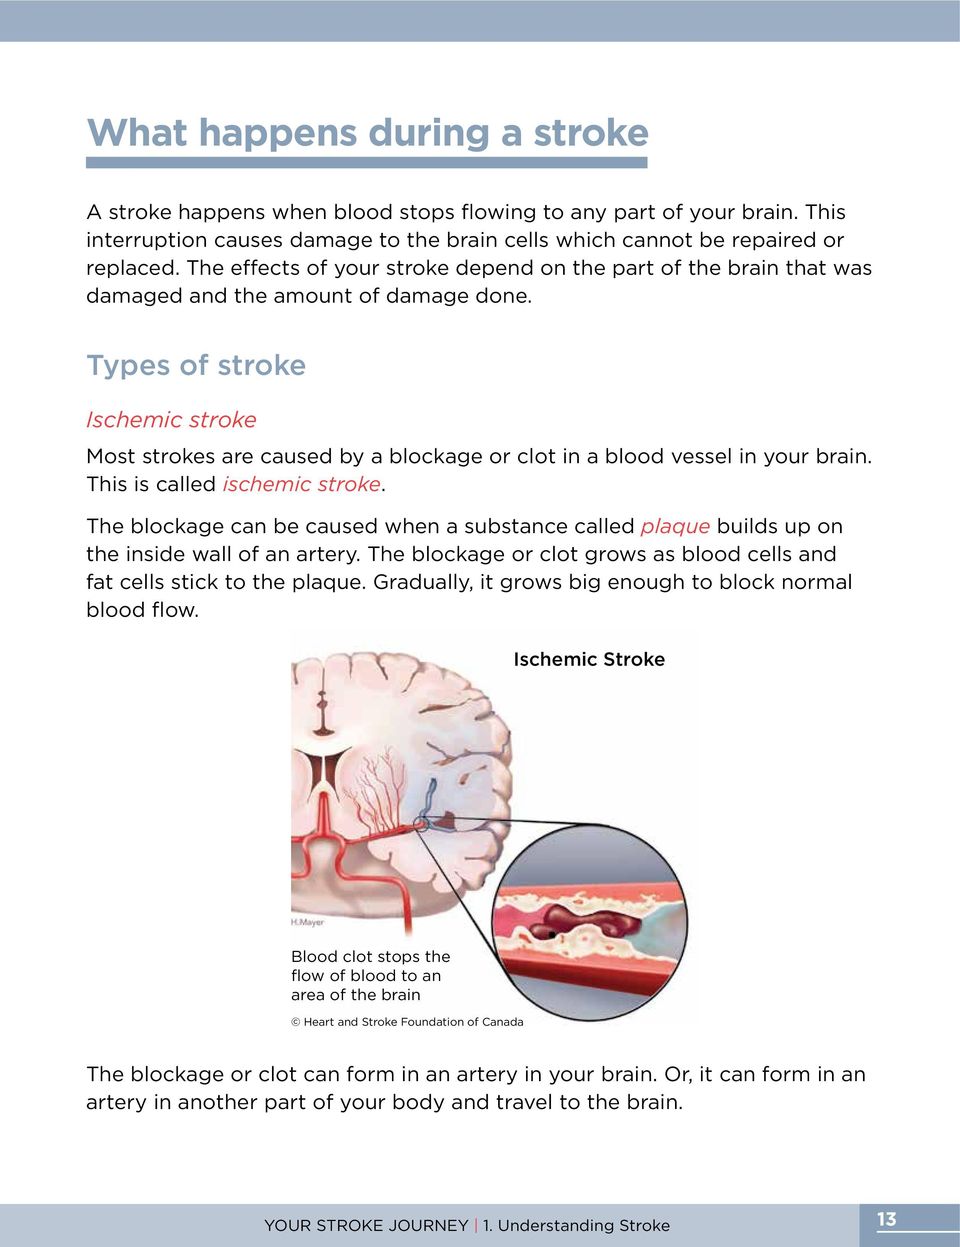 Types of stroke Ischemic stroke Most strokes are caused by a blockage or clot in a blood vessel in your brain. This is called ischemic stroke.